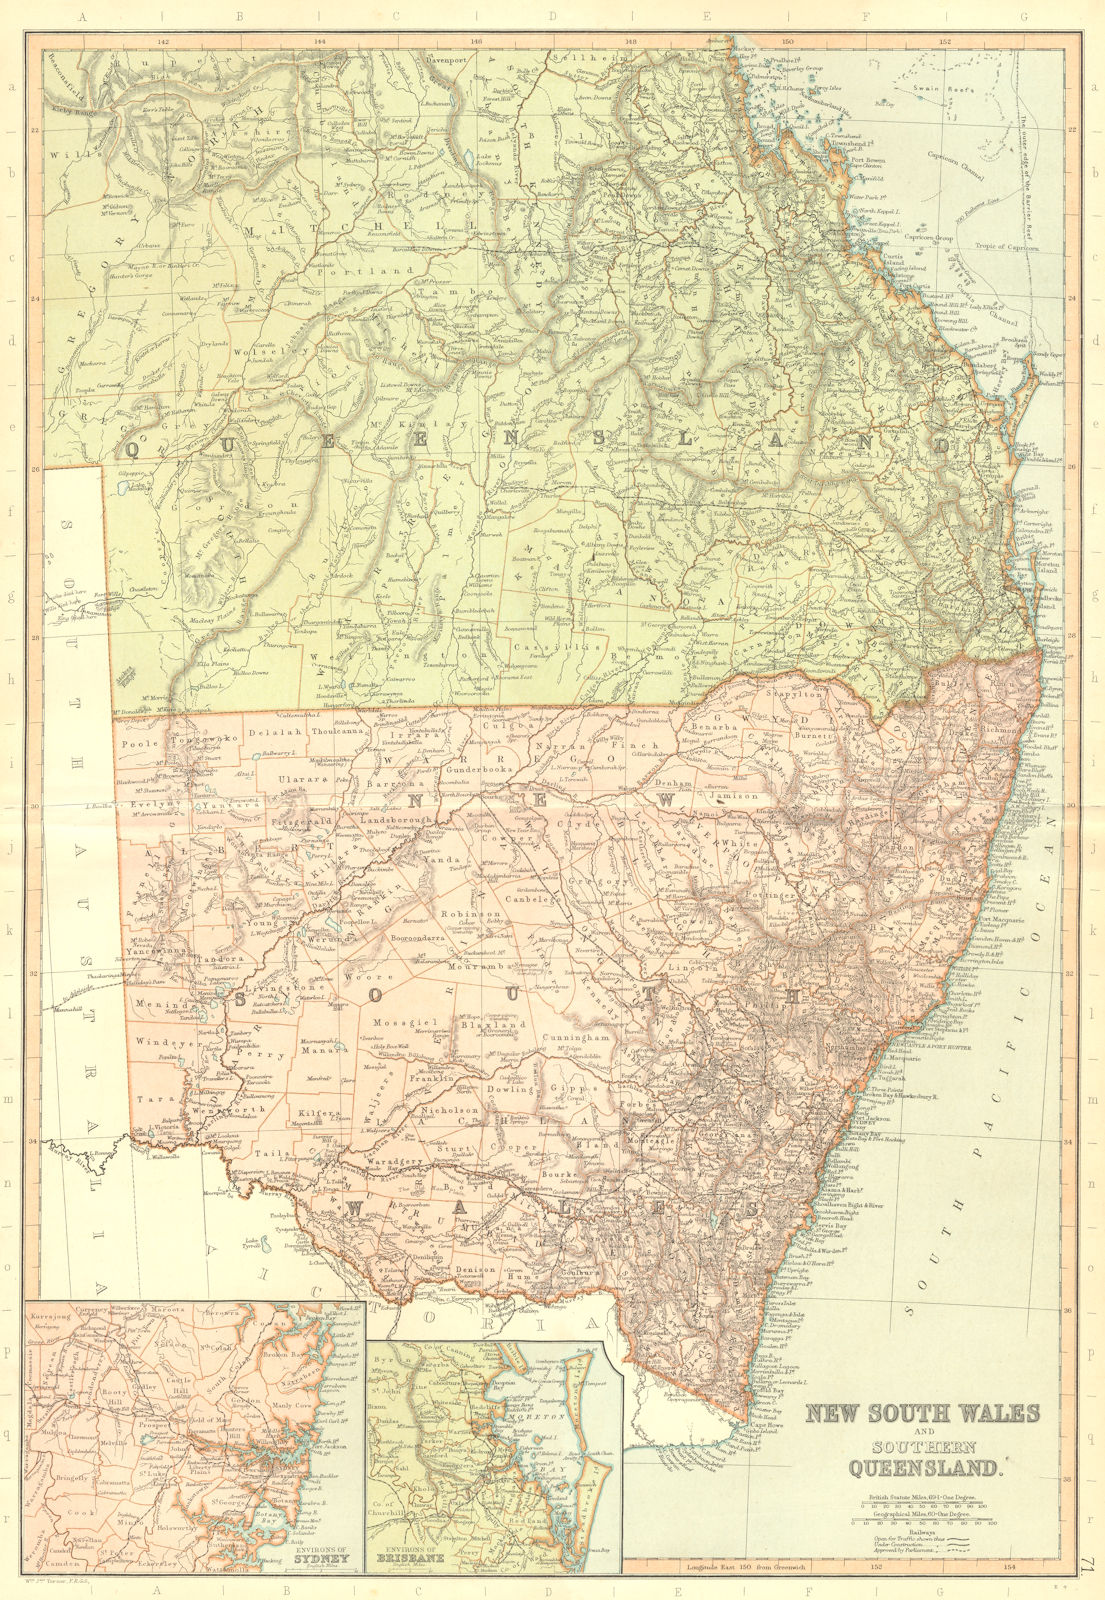 Associate Product NEW SOUTH WALES & QUEENSLAND. Australia. Sydney Brisbane. BLACKIE 1893 old map